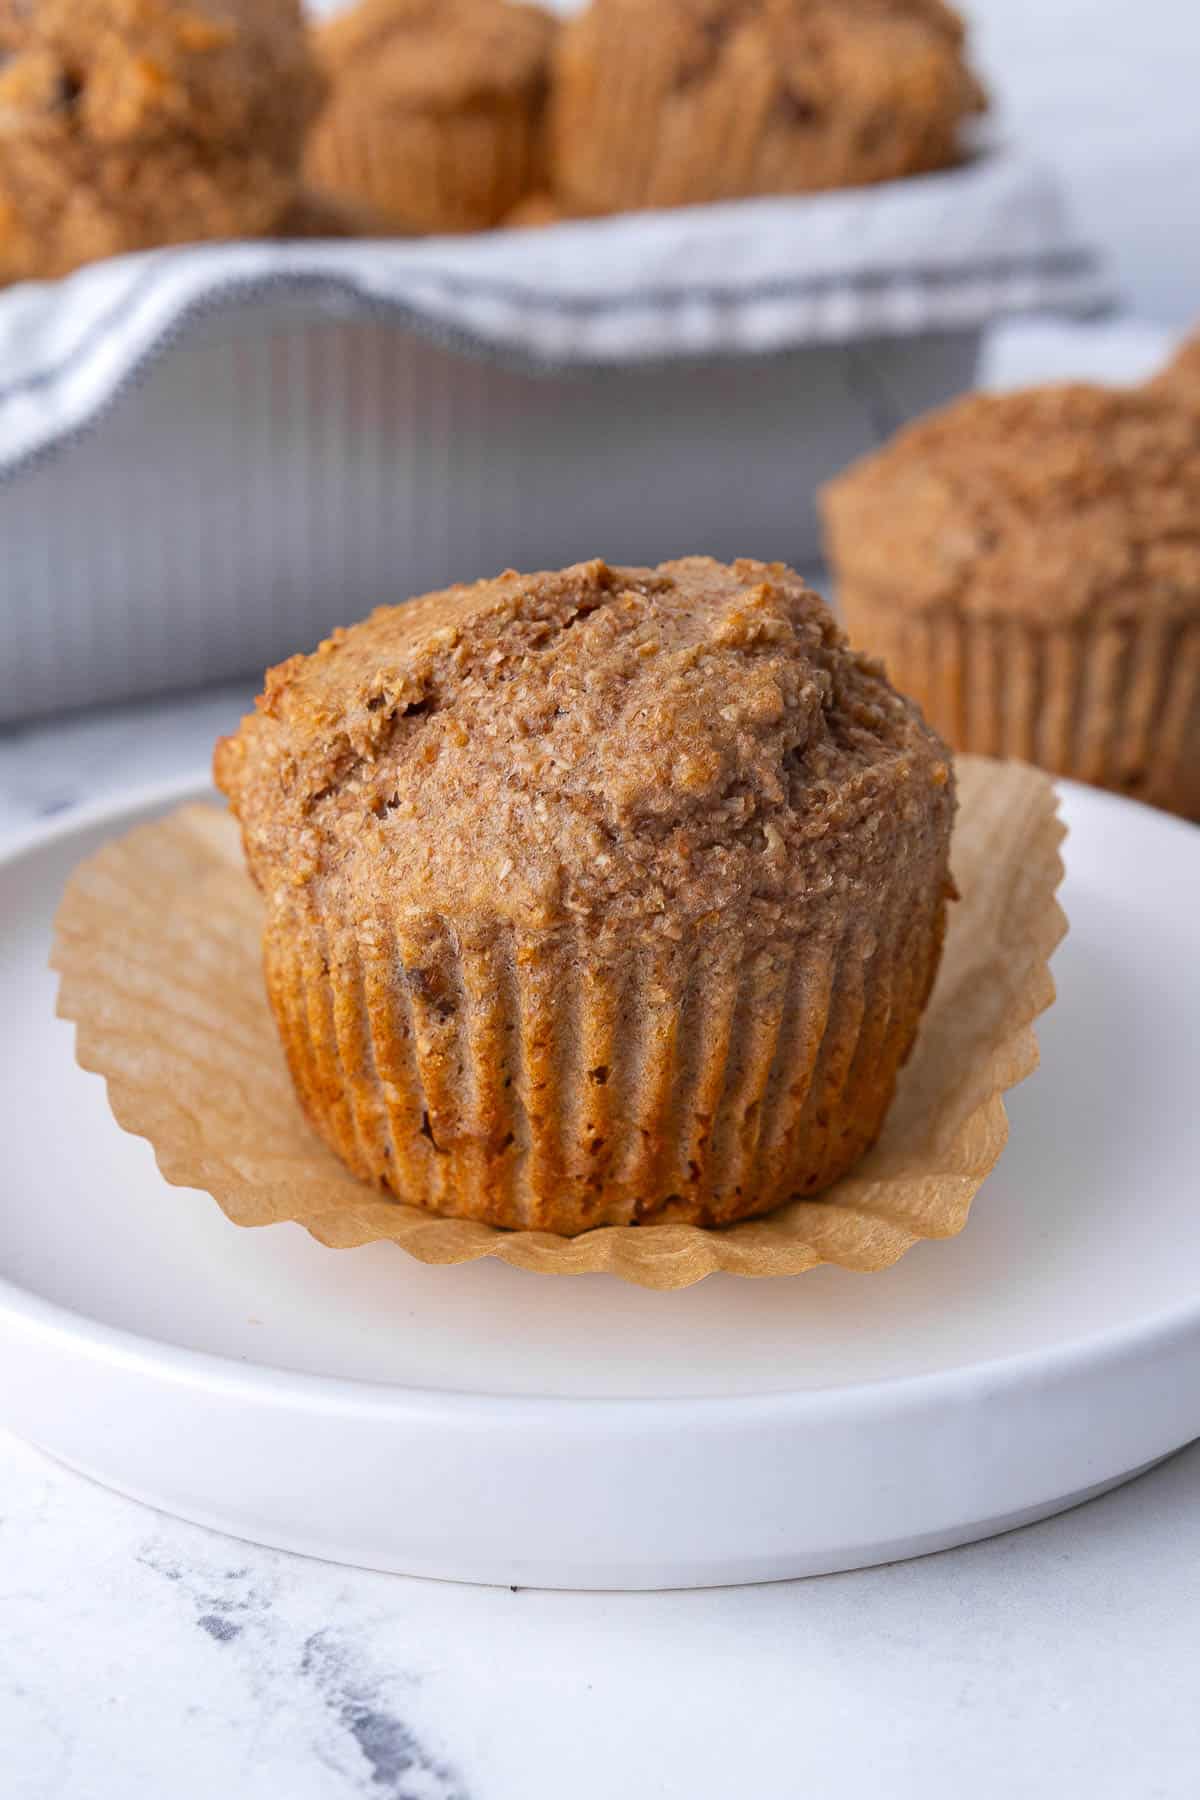 Bran muffin on a plate with the paper peeled away.